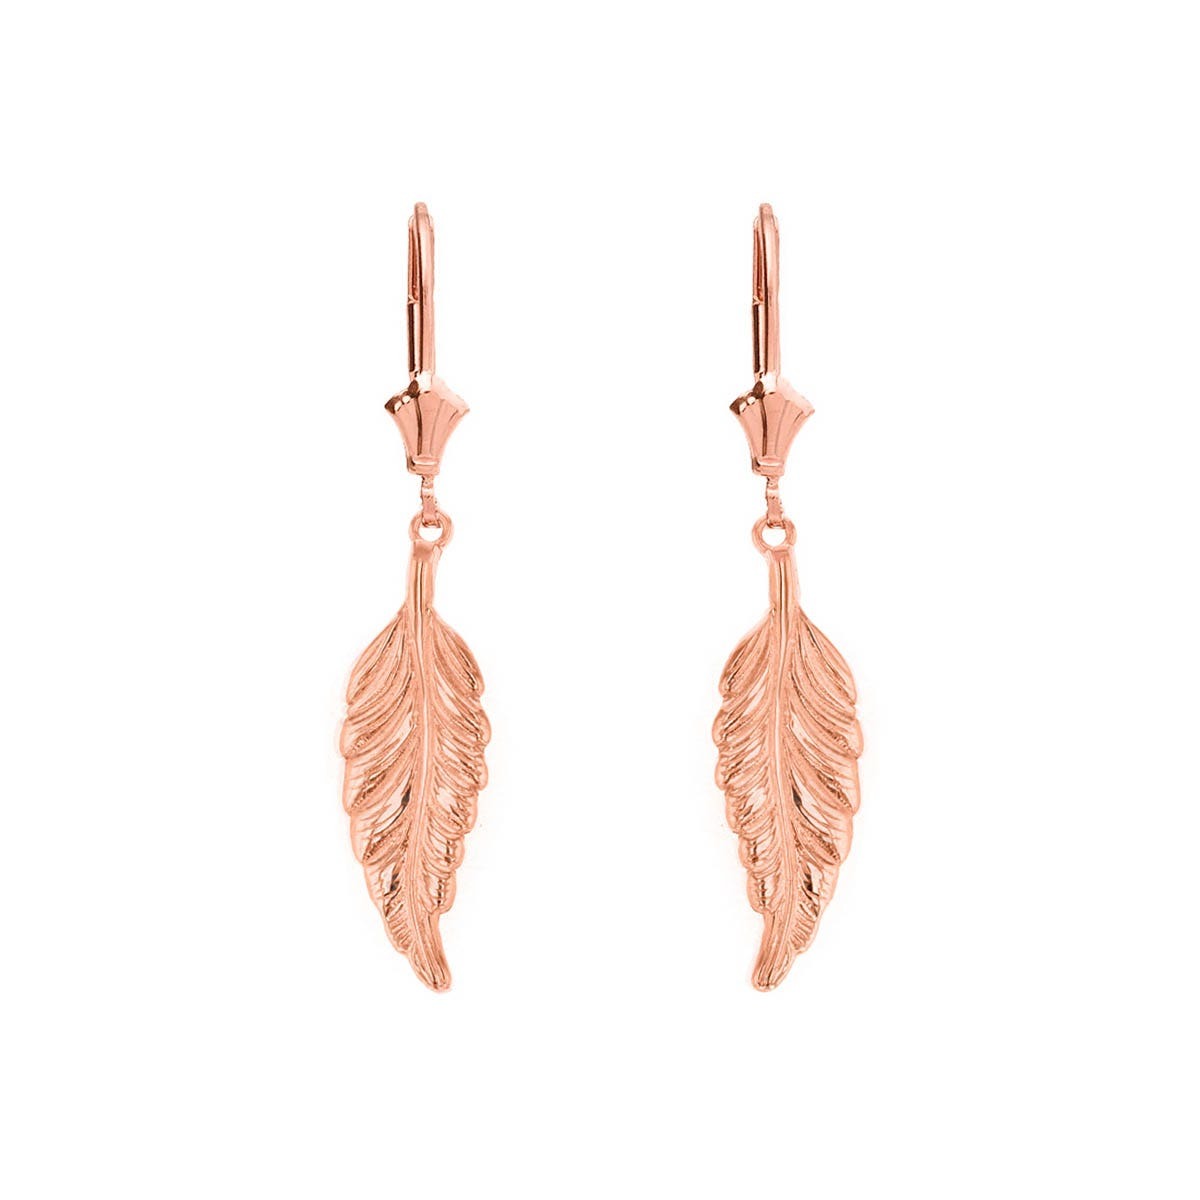 Gent Earrings in Rose at Gold Boutique GOOFASH